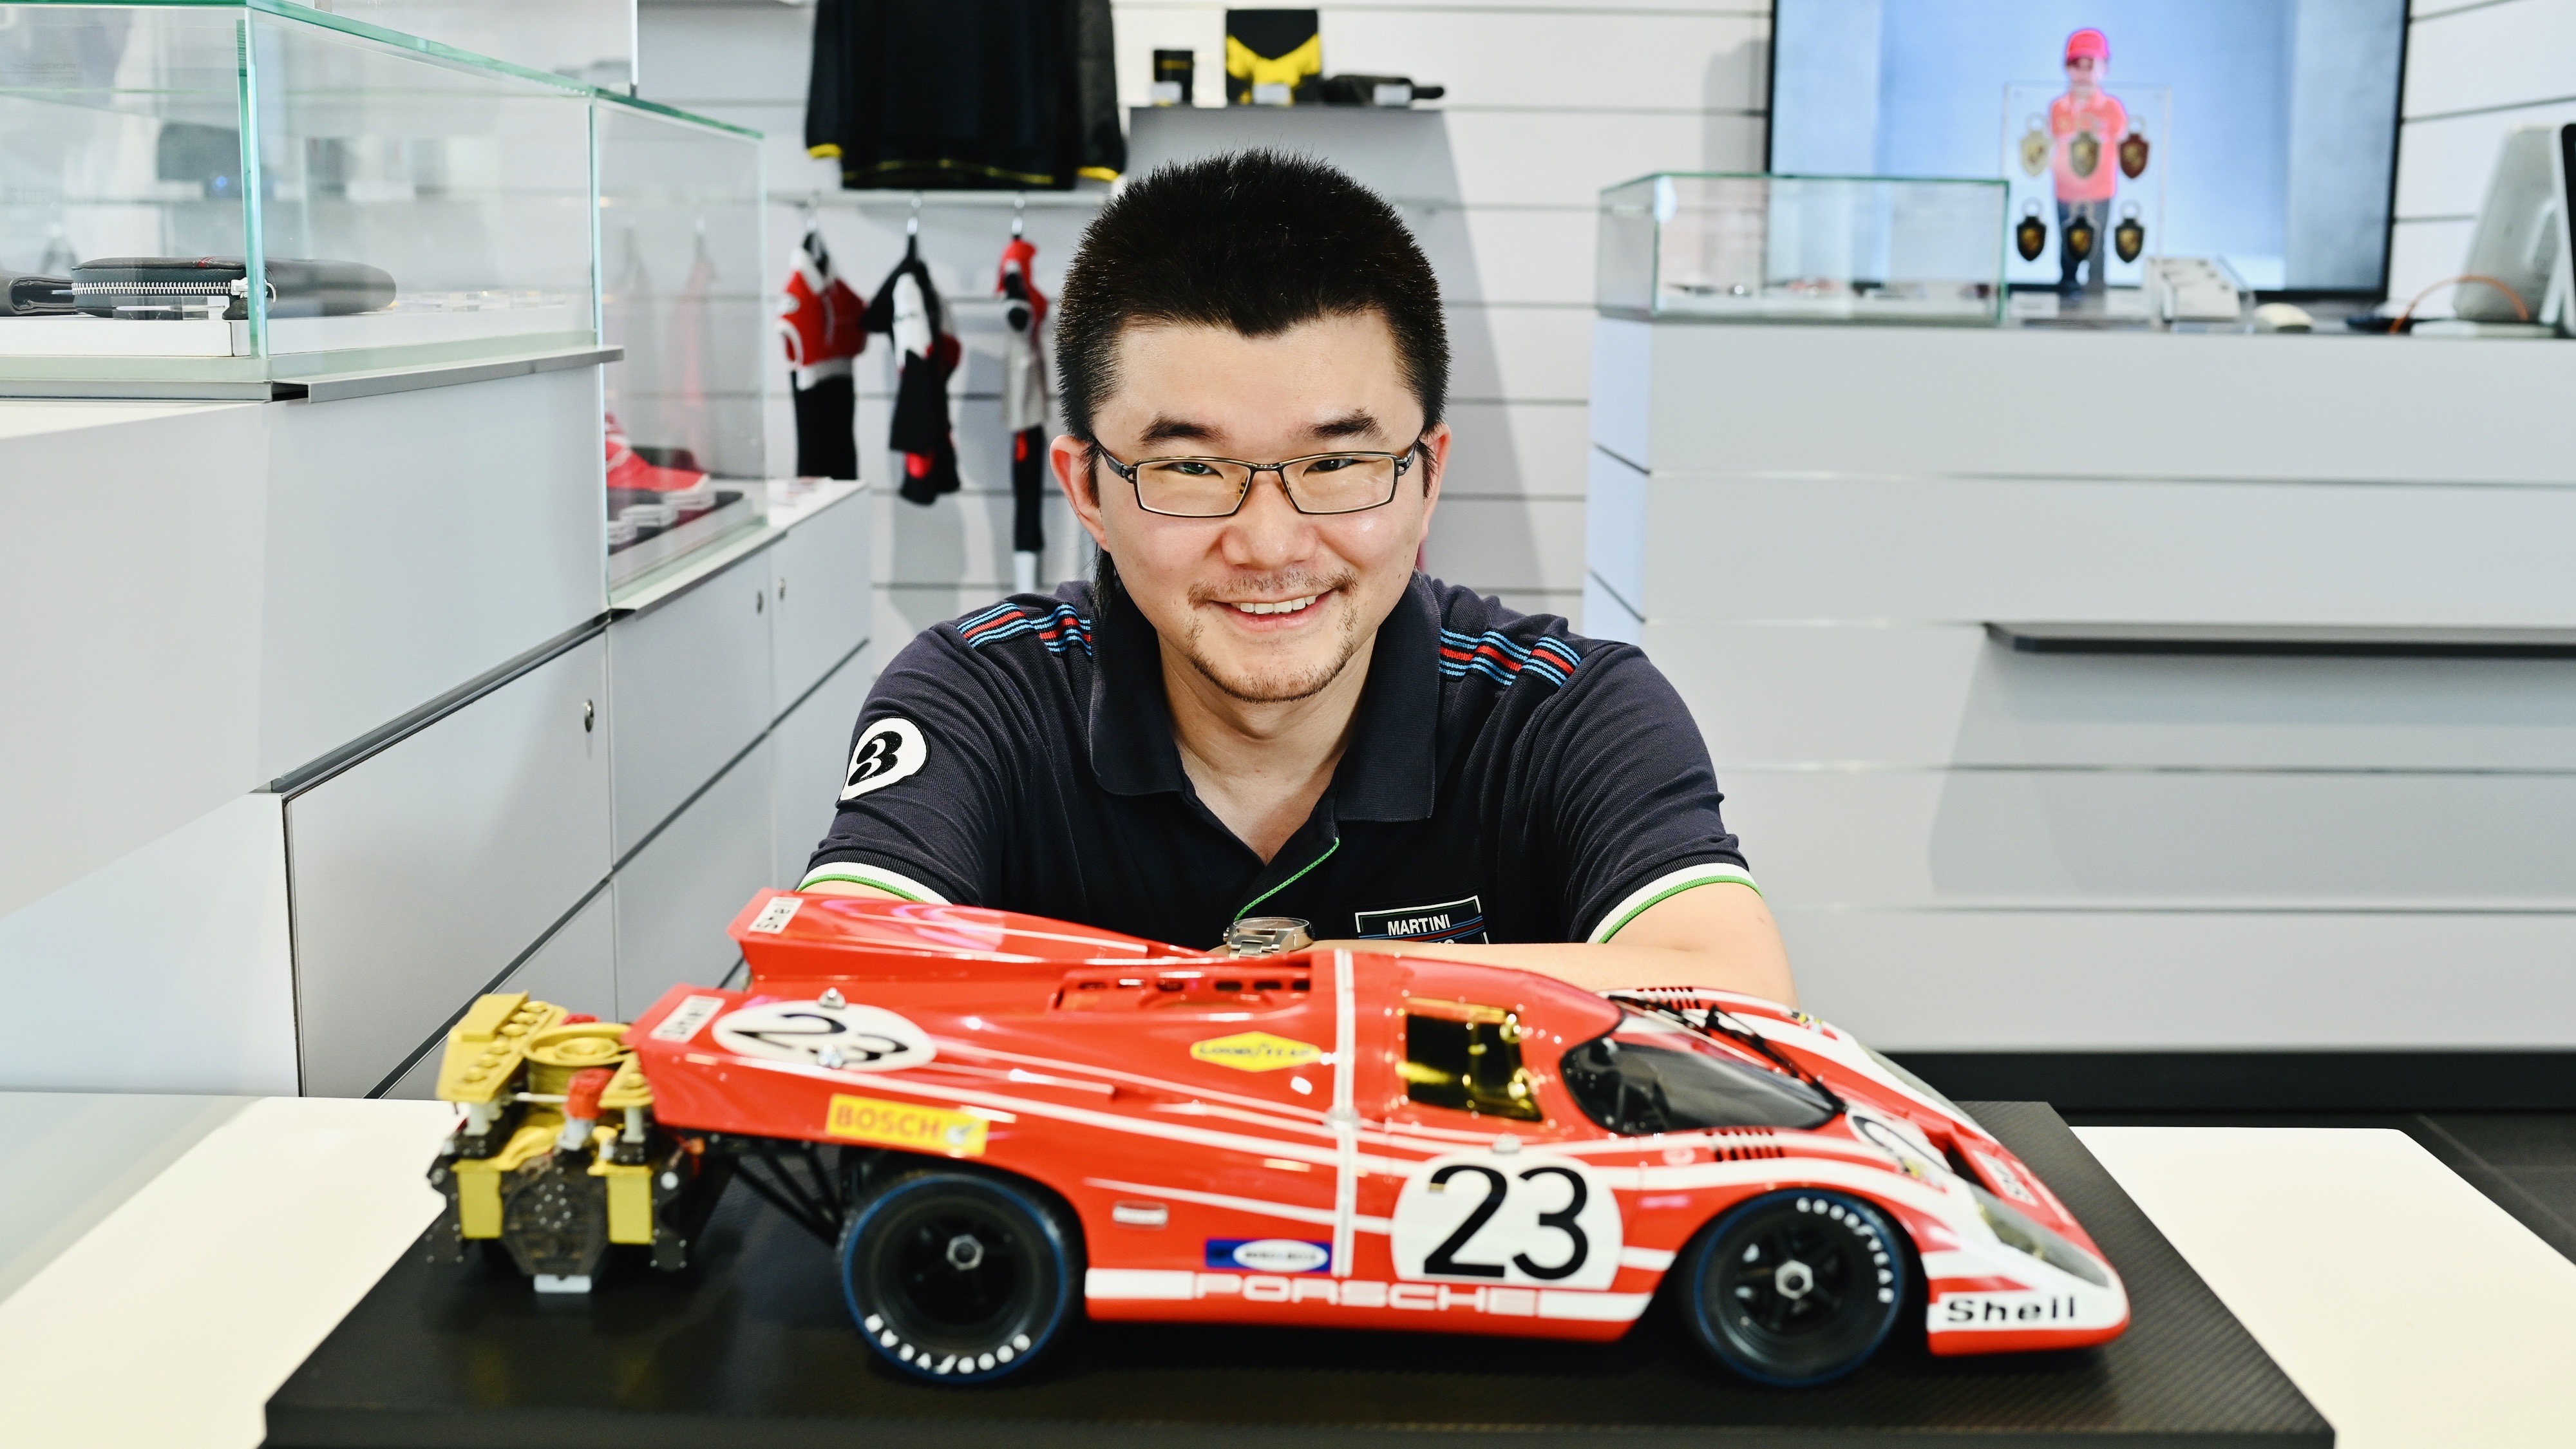 Man with scale model of Porsche 917 in Salzburg livery